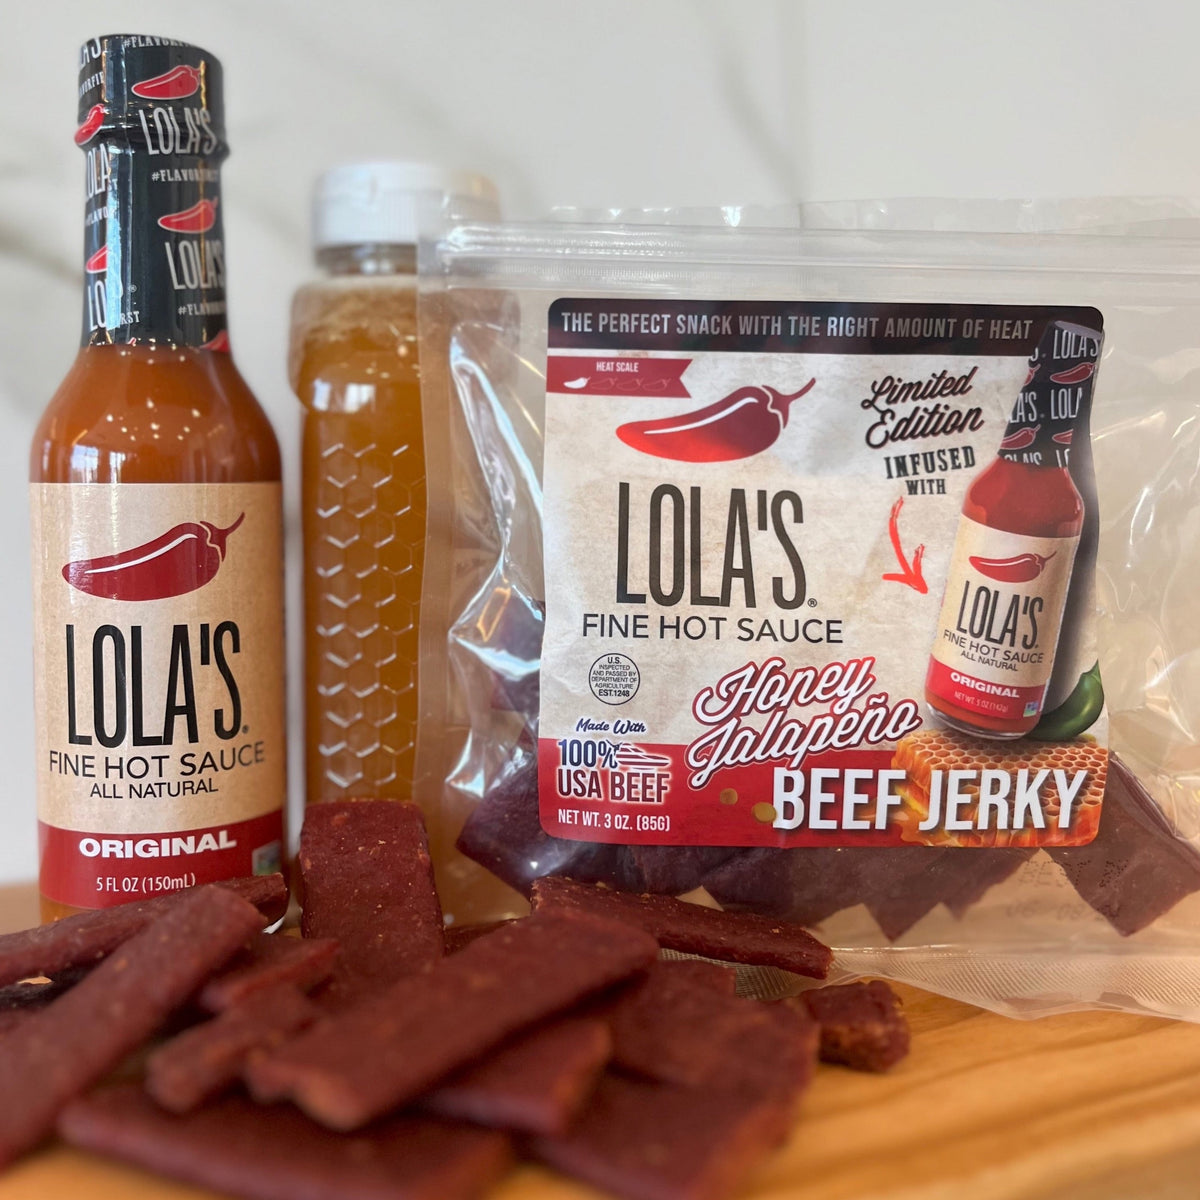 A group of food items on a table, including a bottle and package of Lola's Fine Hot Sauce's Honey Jalapeño Beef Jerky.